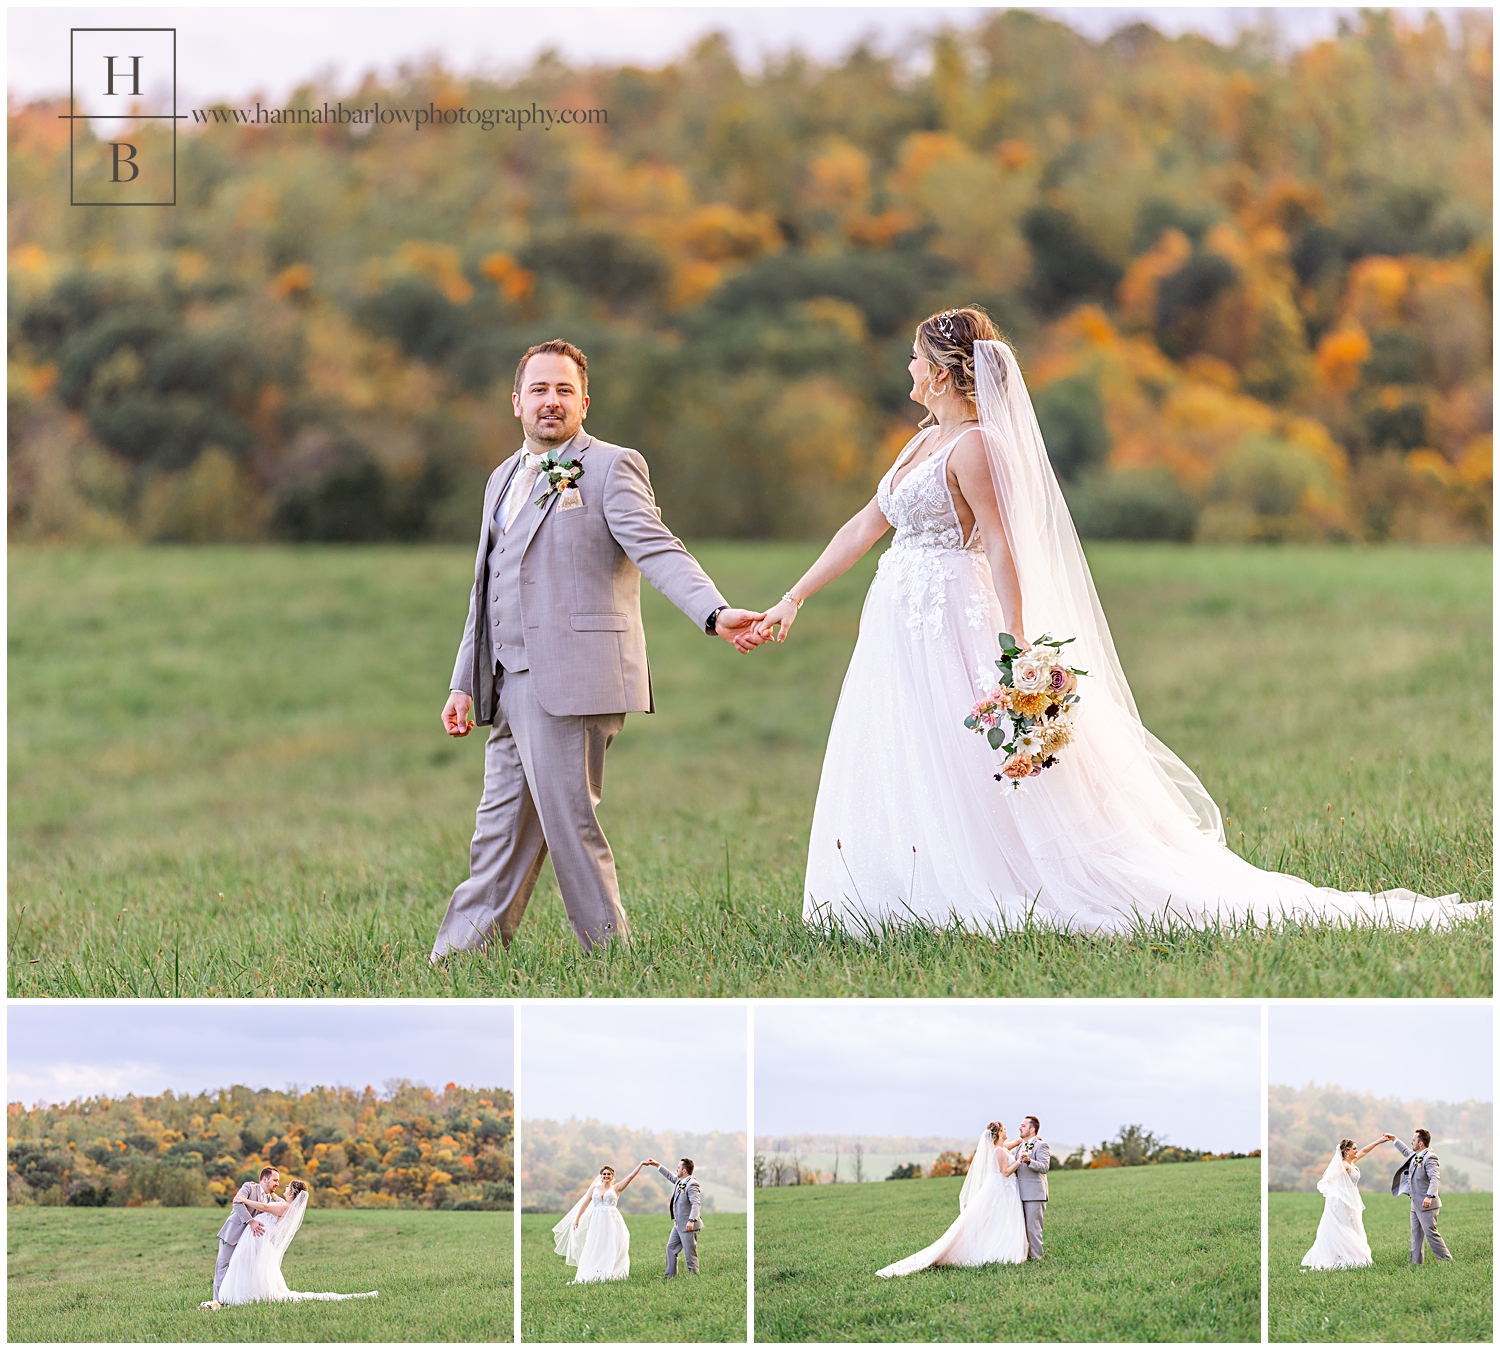 Bride and groom walk through field with fall leaves in background.